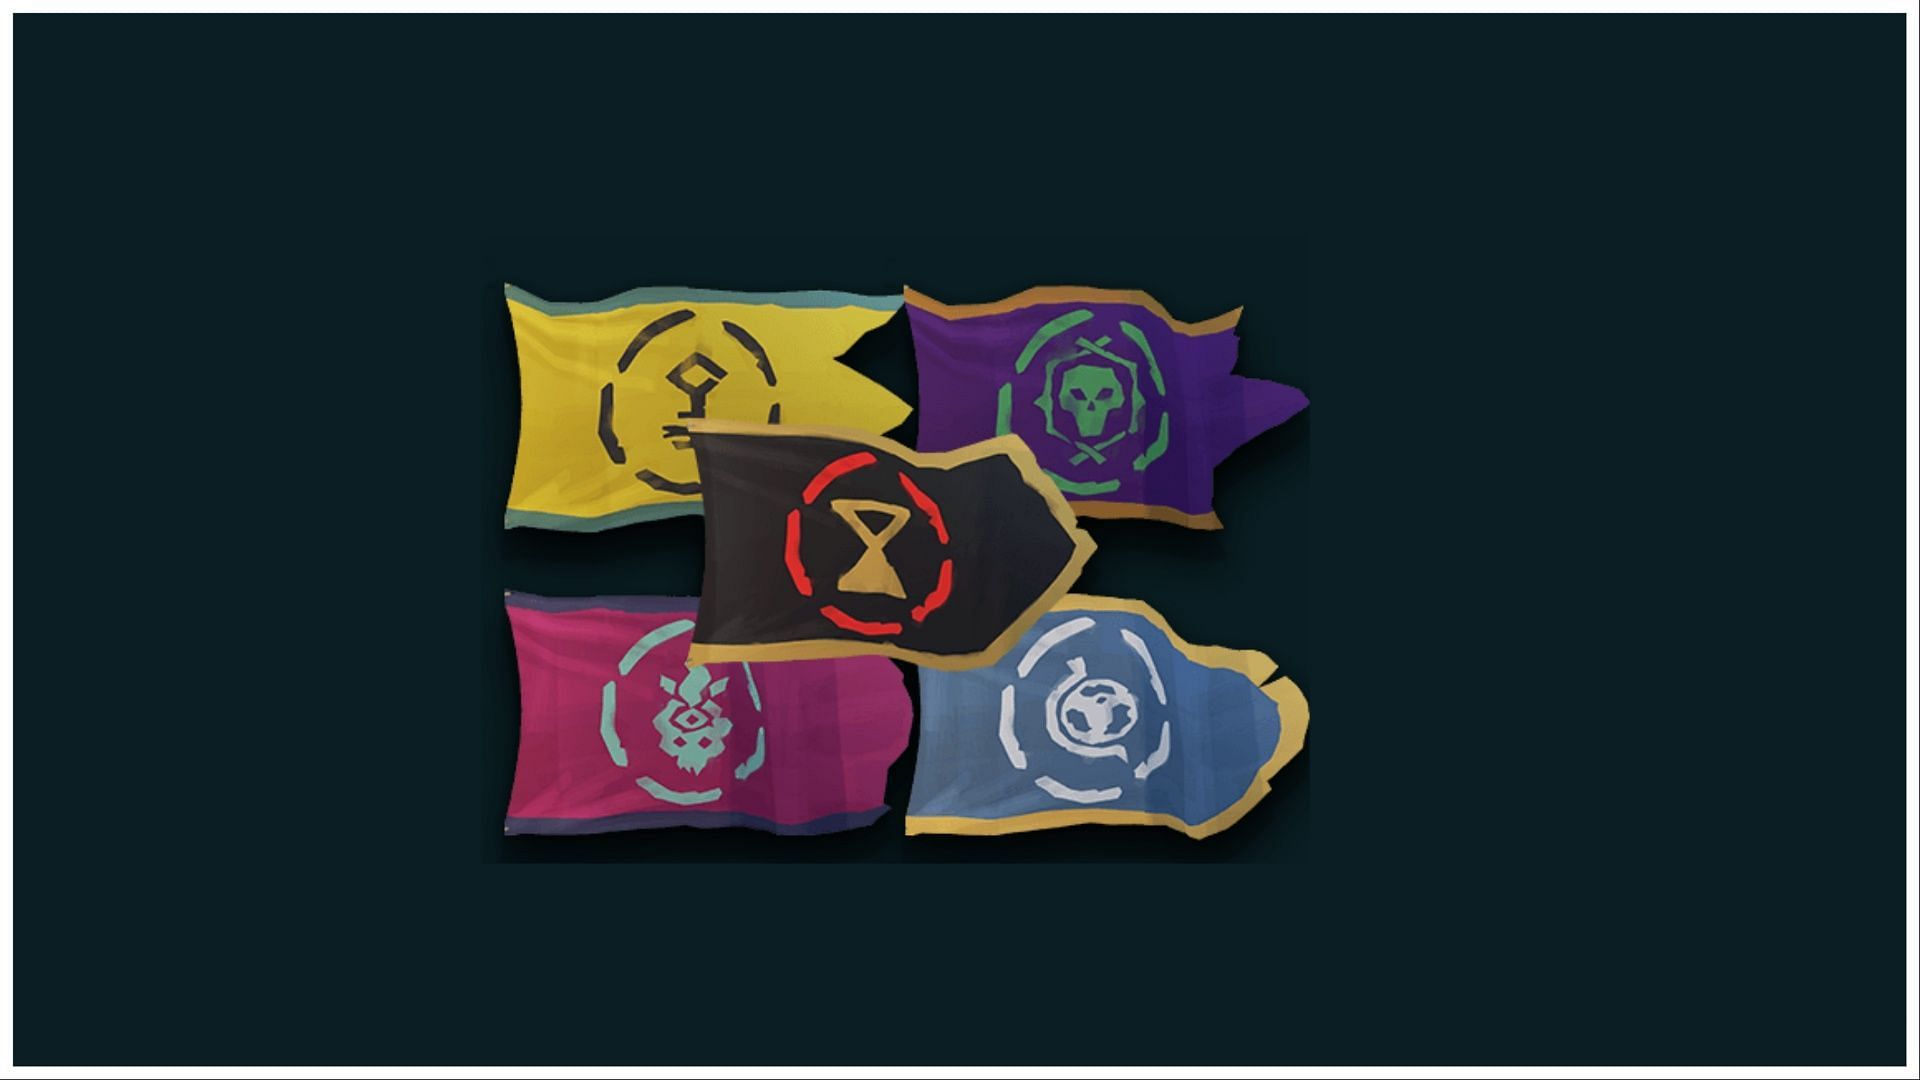 Level 5 emissary flags as seen on ships. (Image via Rare)